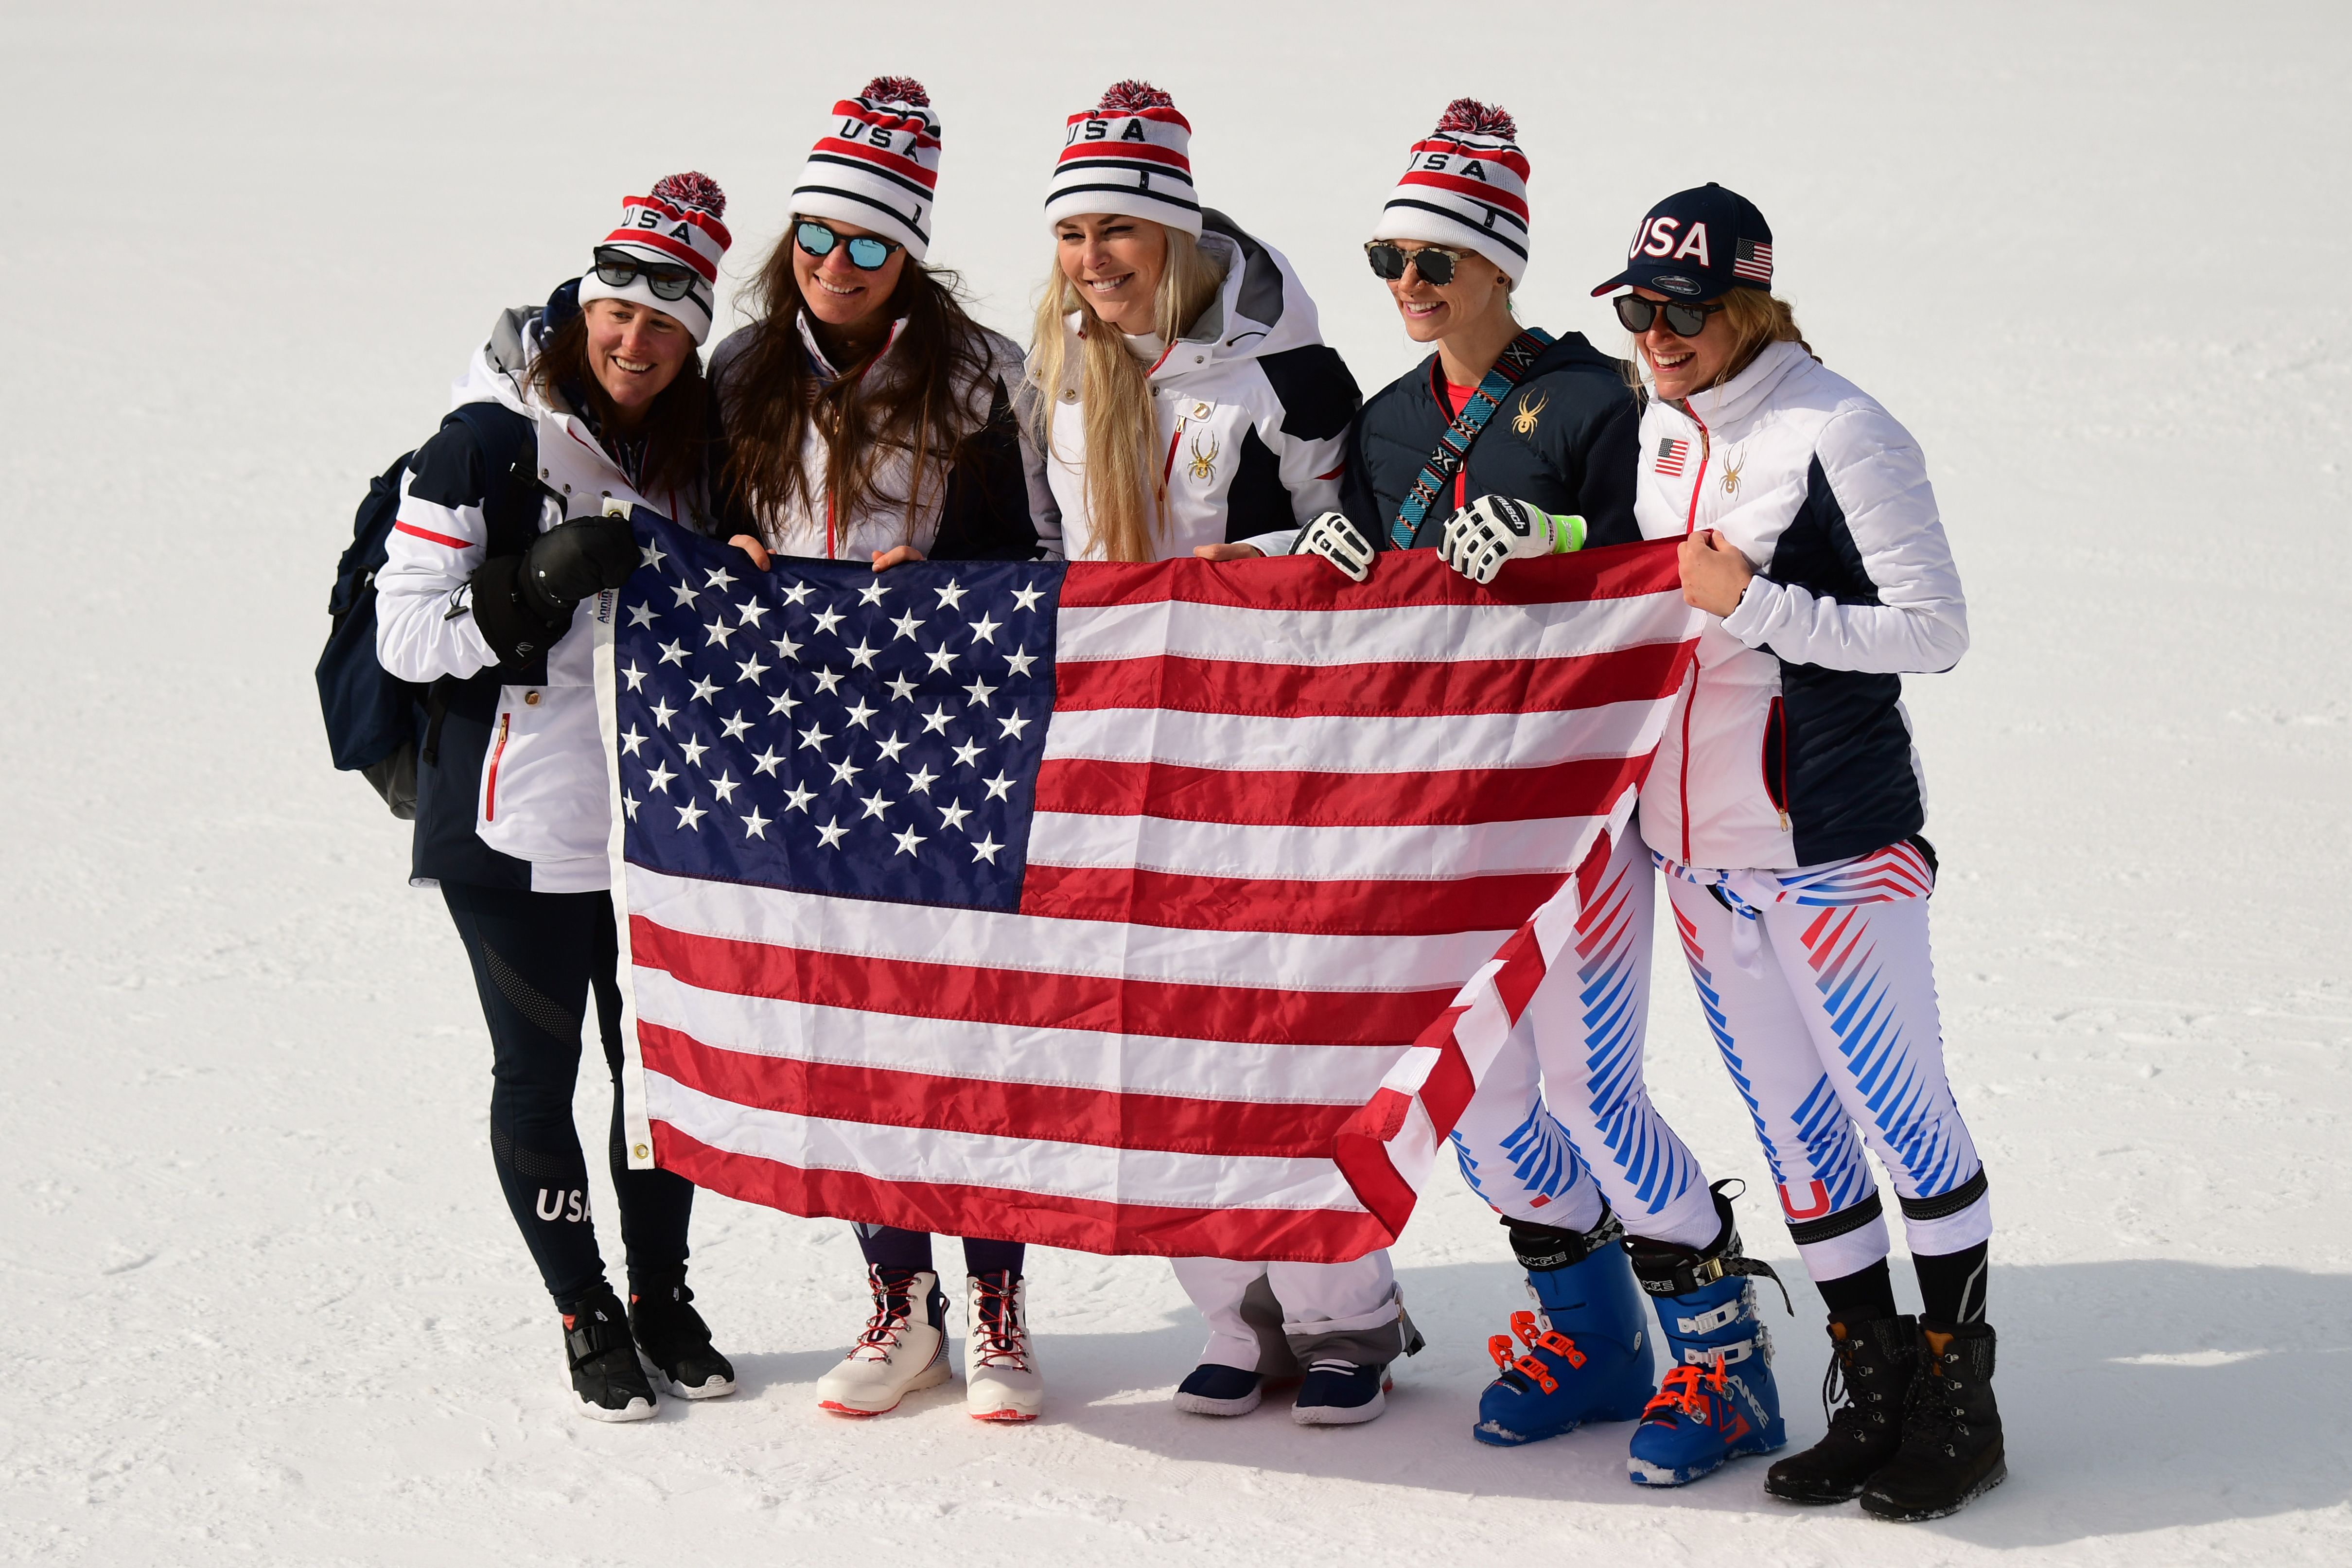 The women's speed team celebrates four in the top 15 on downhill day at the Winter Olympics in PyeongChang, South Korea.